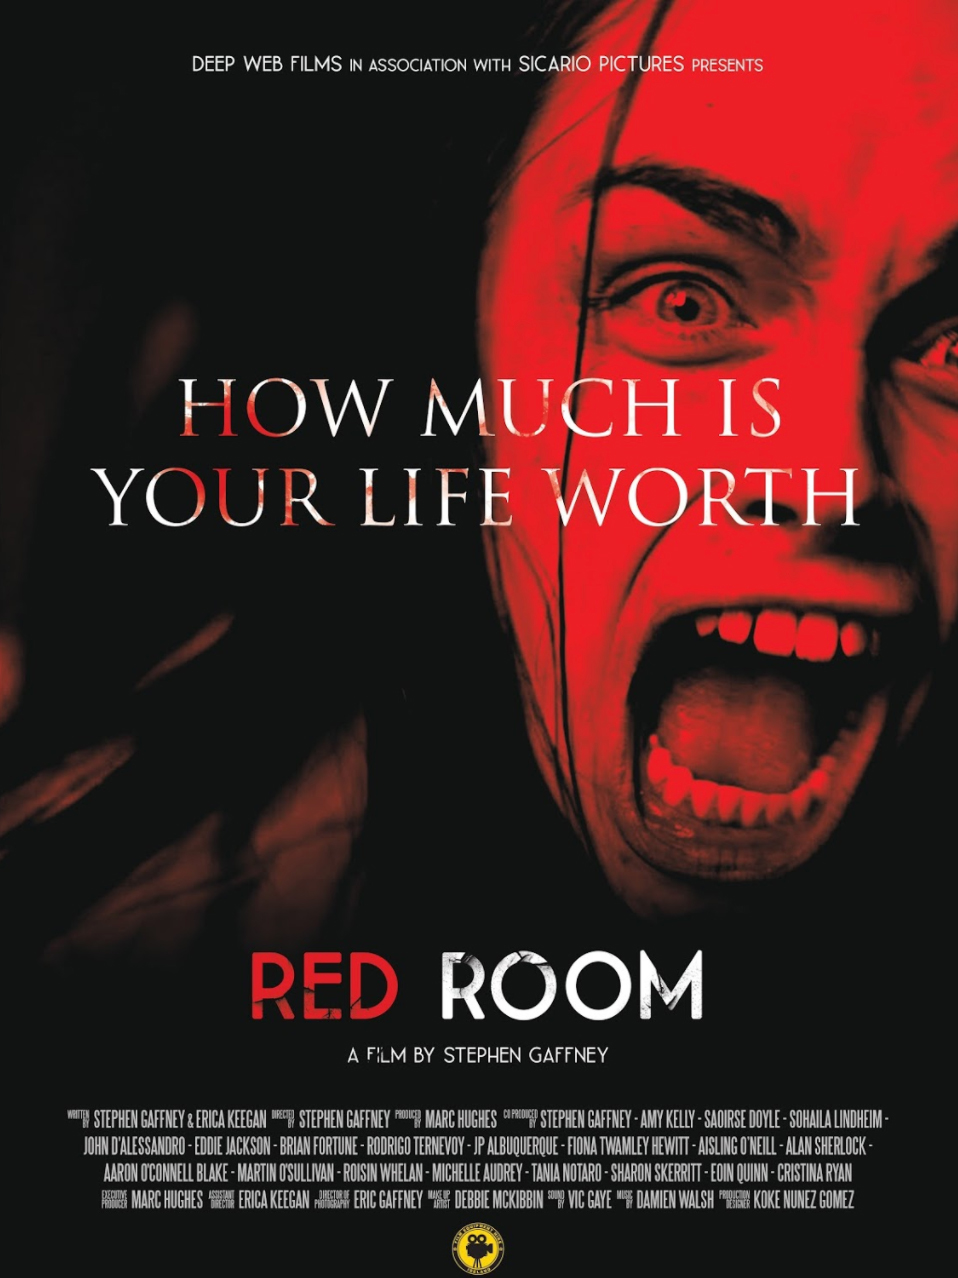 Red Room Director Stephen Gaffney Talks About The New